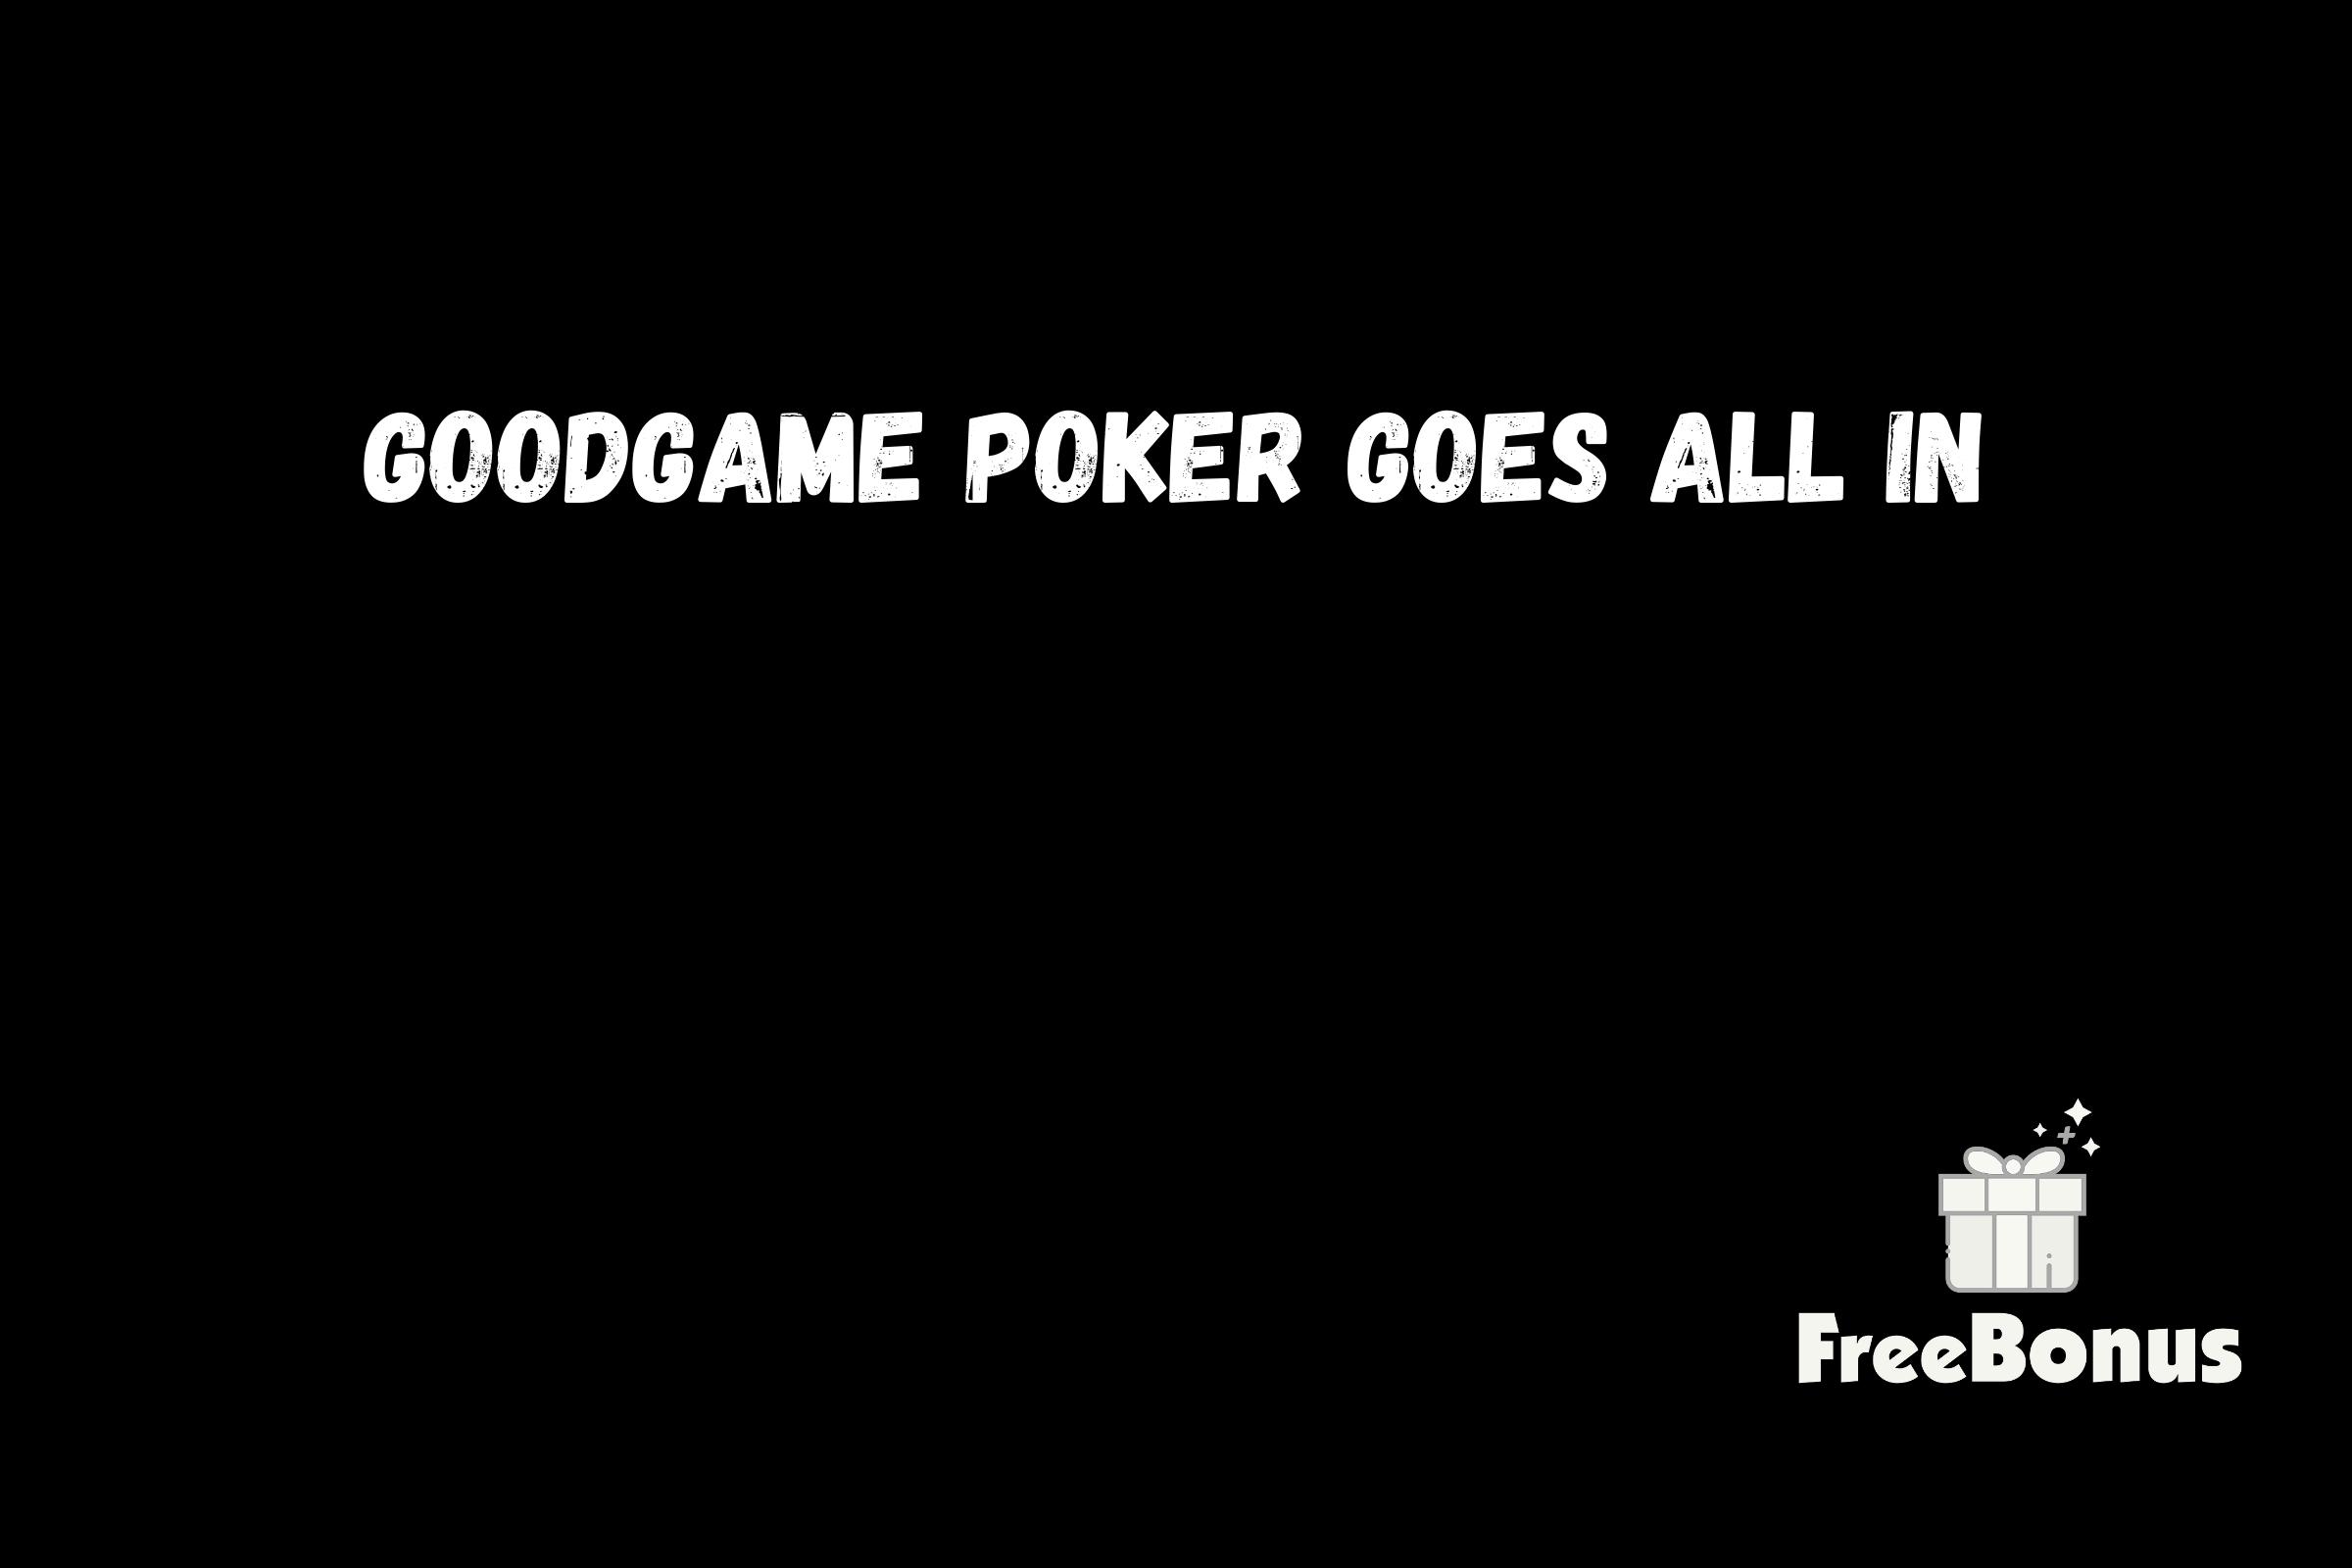 Goodgame Poker Goes All In